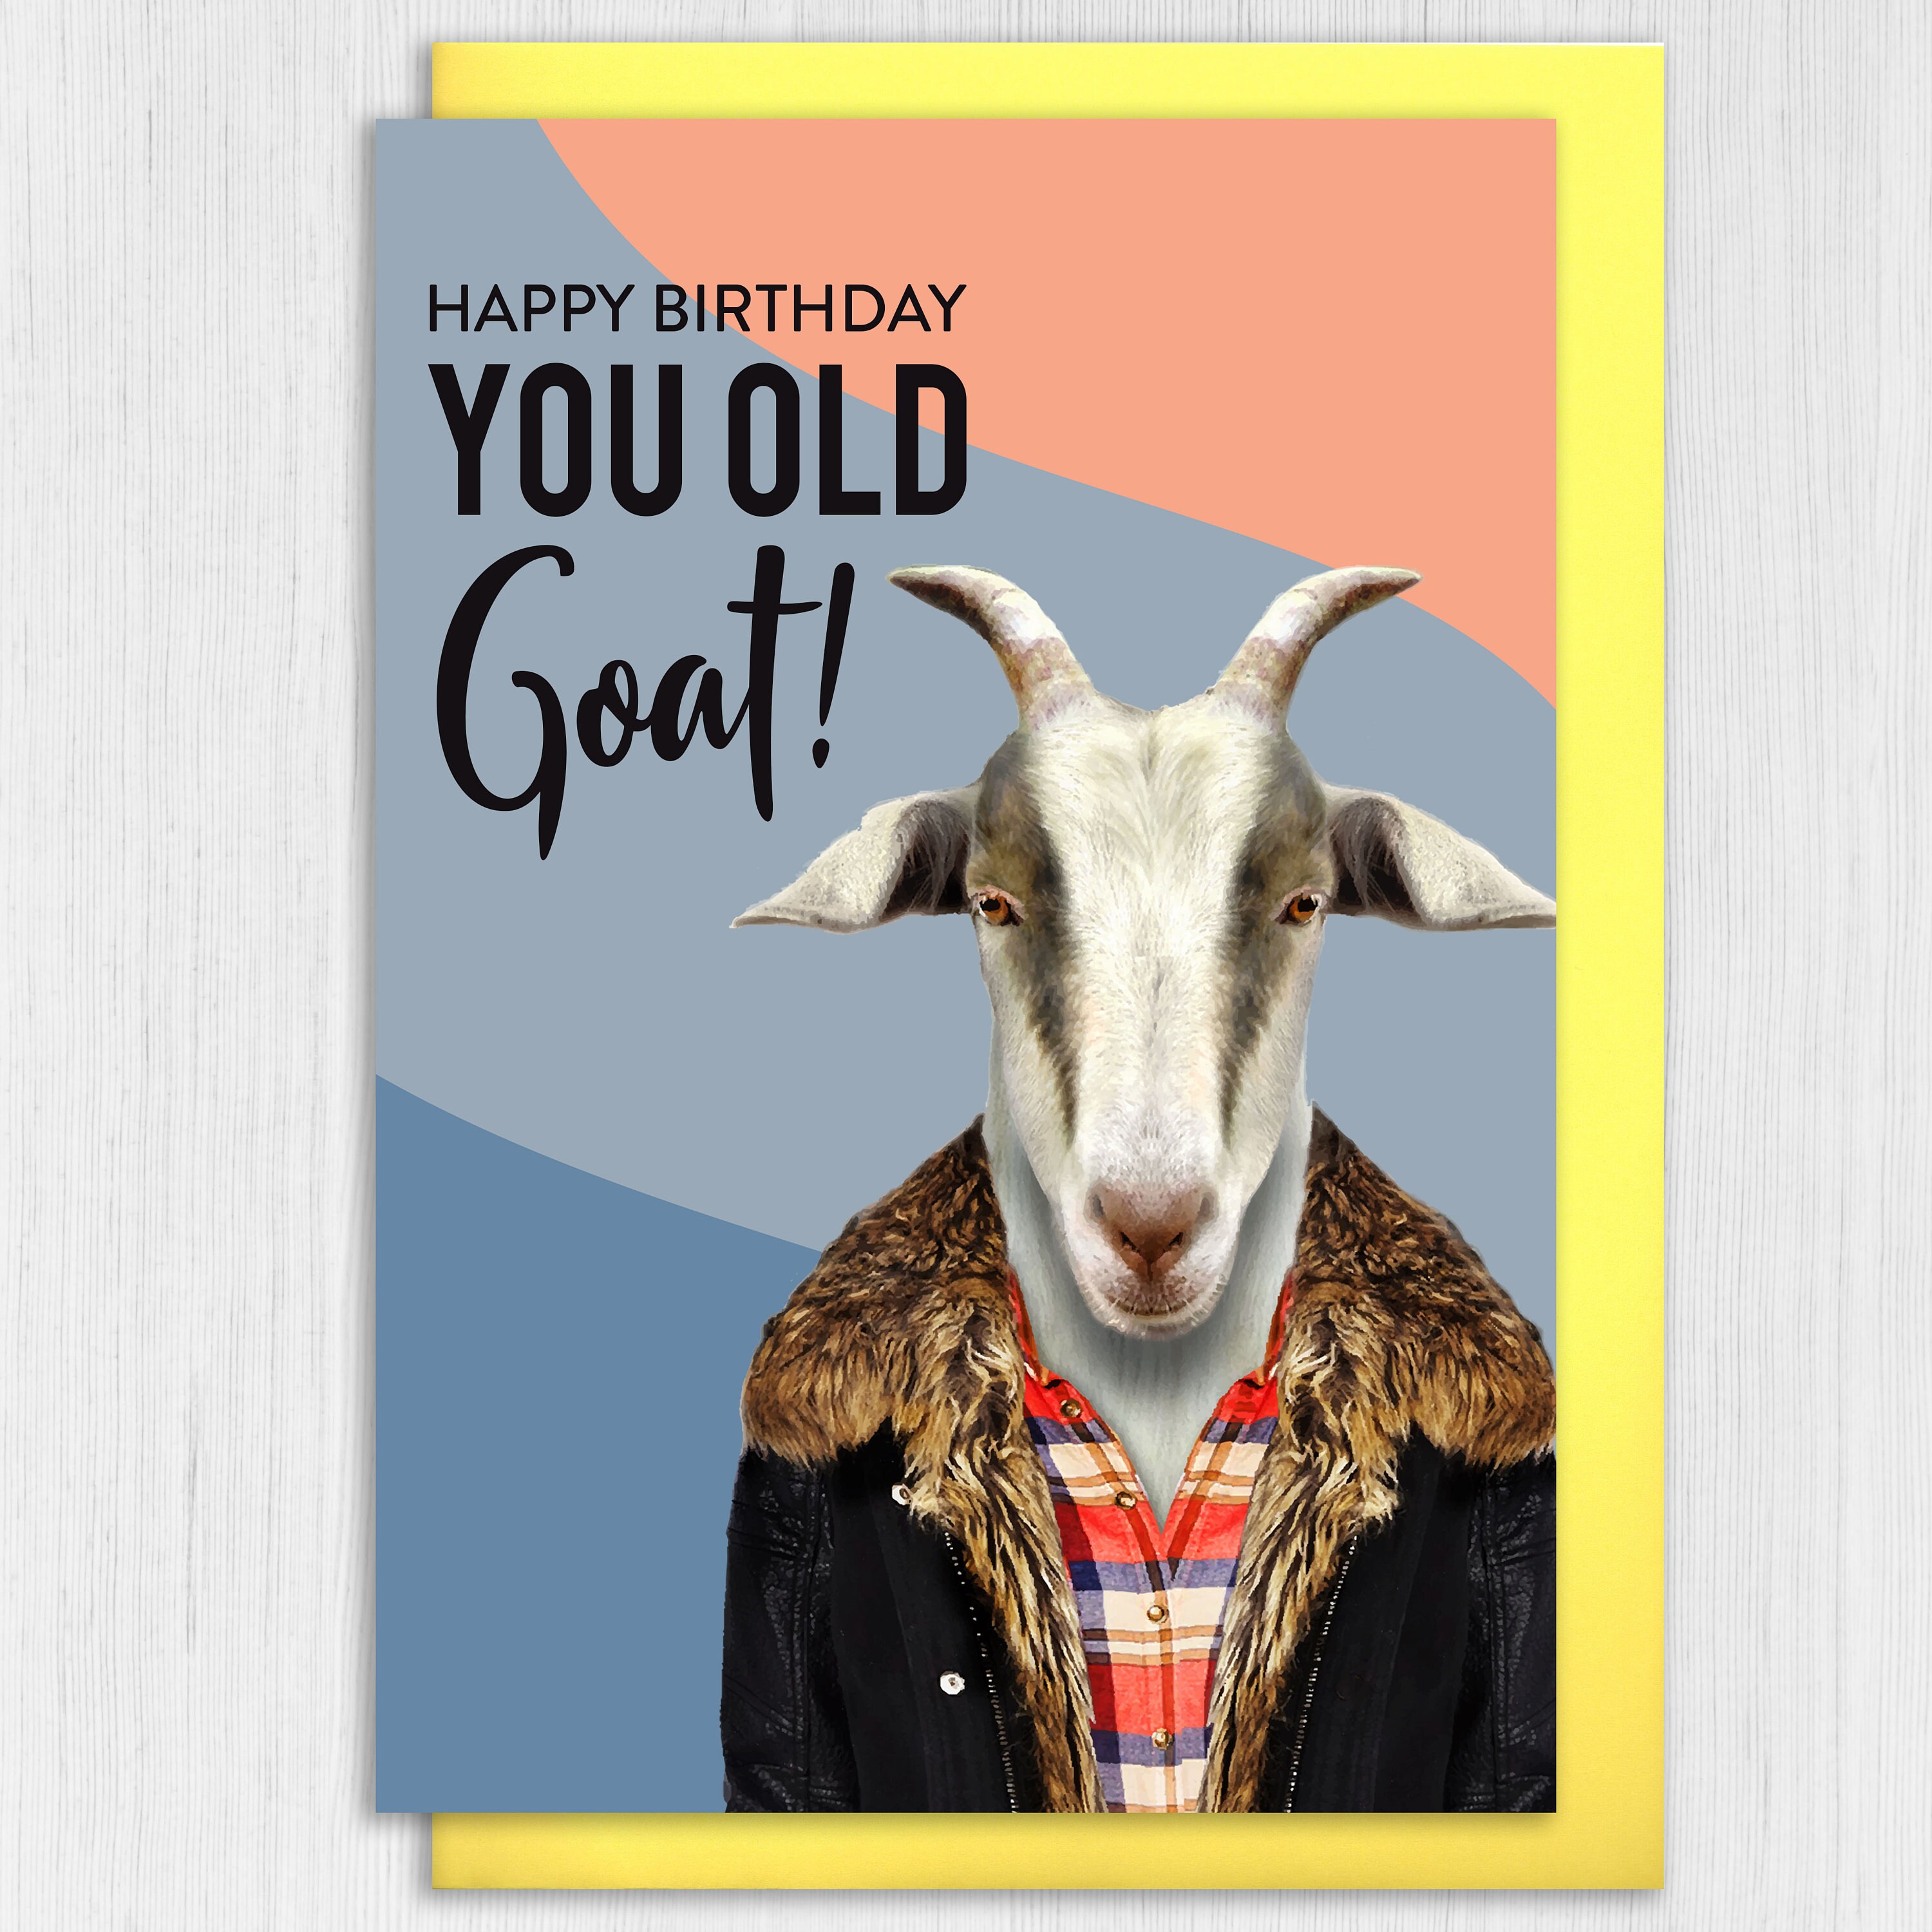 Happy Birthday You Old Goat Funny Goat in Clothes Birthday Card for Old  Person, Old Lady, Old Man animalyser size A6/a5/a4/square 6x6 